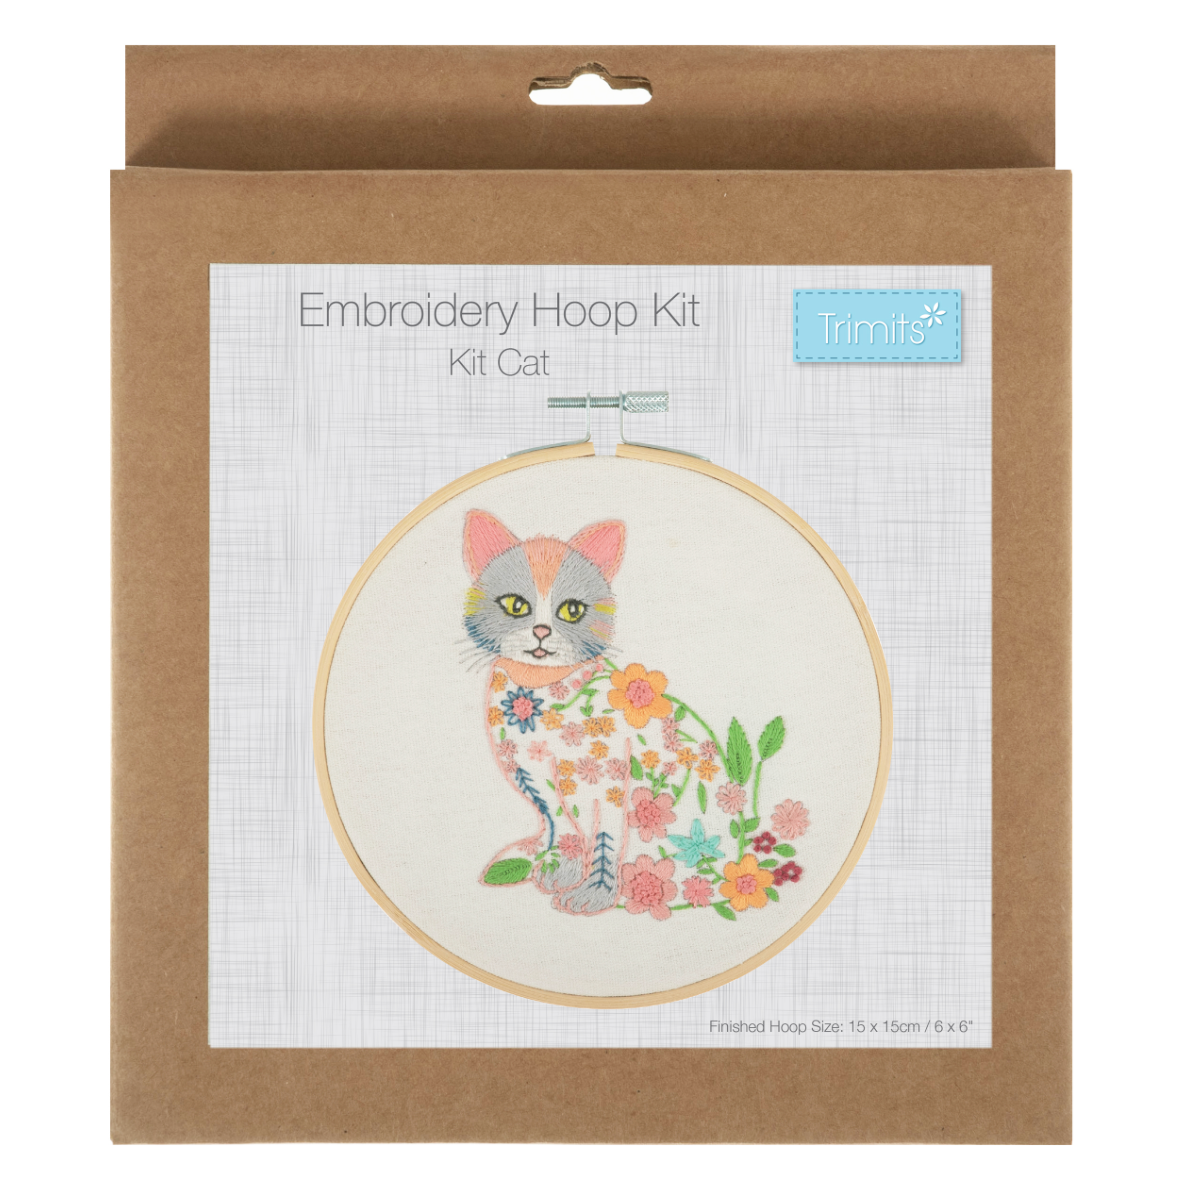 Embroidery Kit with Hoop: Kit Cat